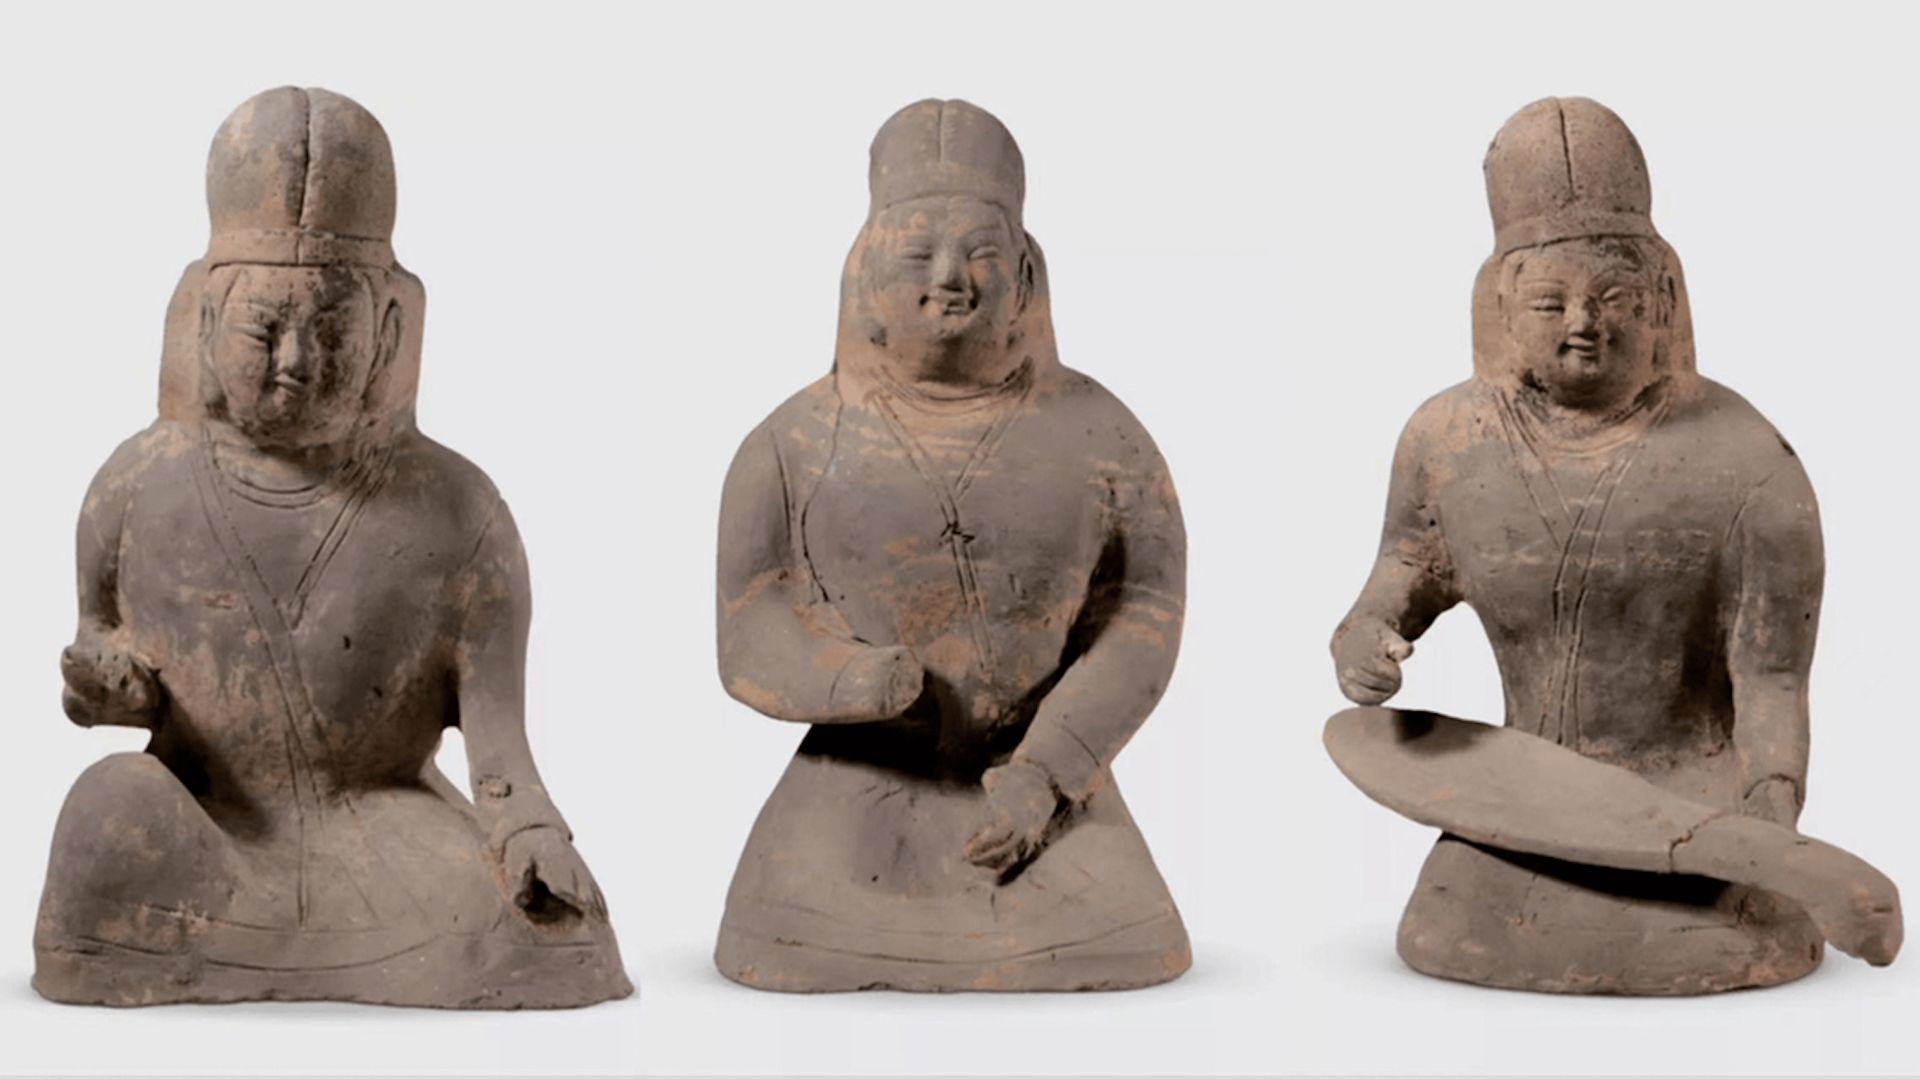 Terracotta figurines discovered by archaeologists from the Datong Institute of Cultural Relics and Archaeology in a tomb dating to the Northern Wei Dynasty in Datong, Shanxi province. Photo courtesy the Datong Institute of Cultural Relics and Archaeology, via China Daily